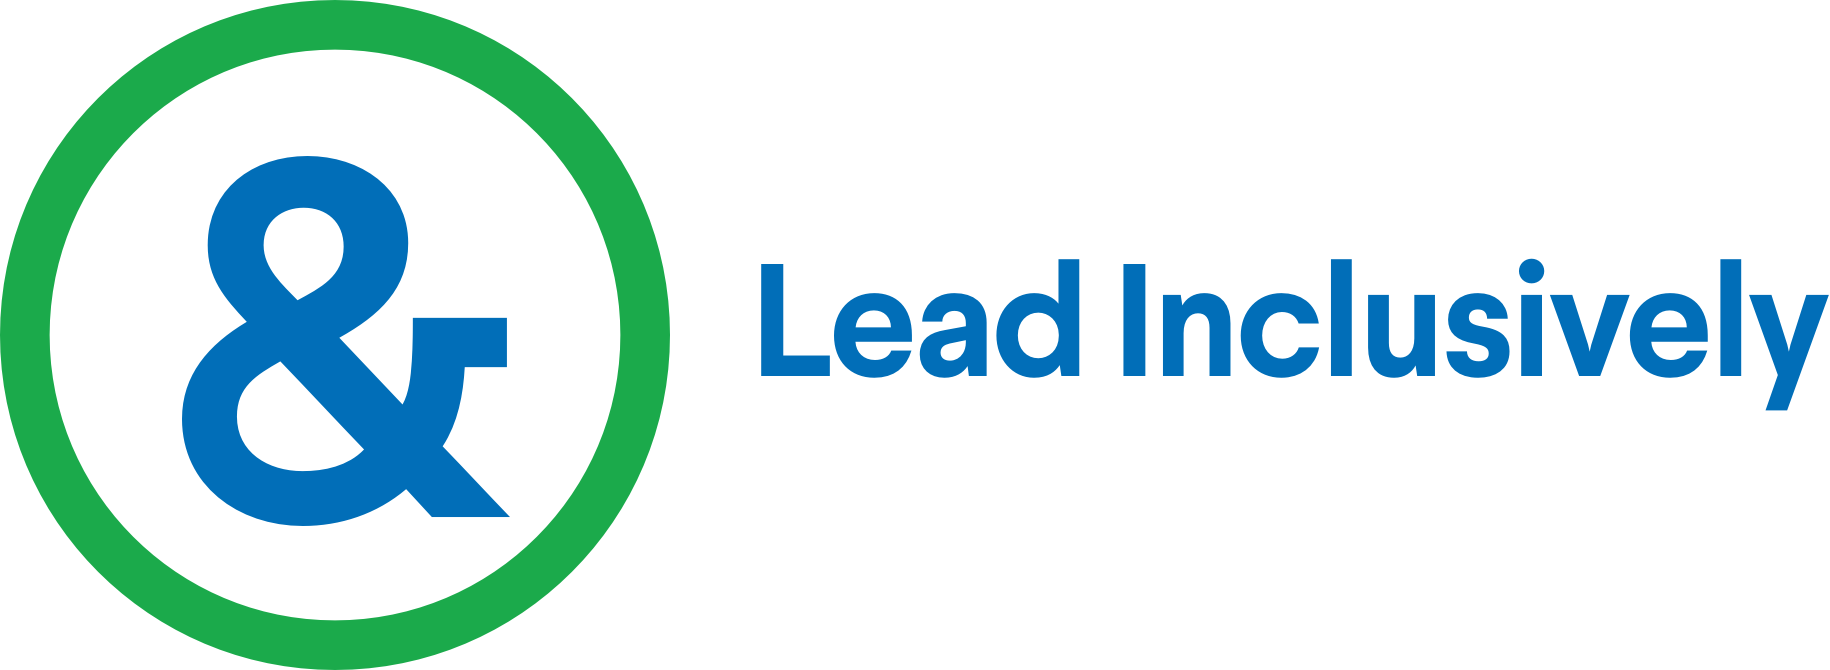 Lead inclusively logo